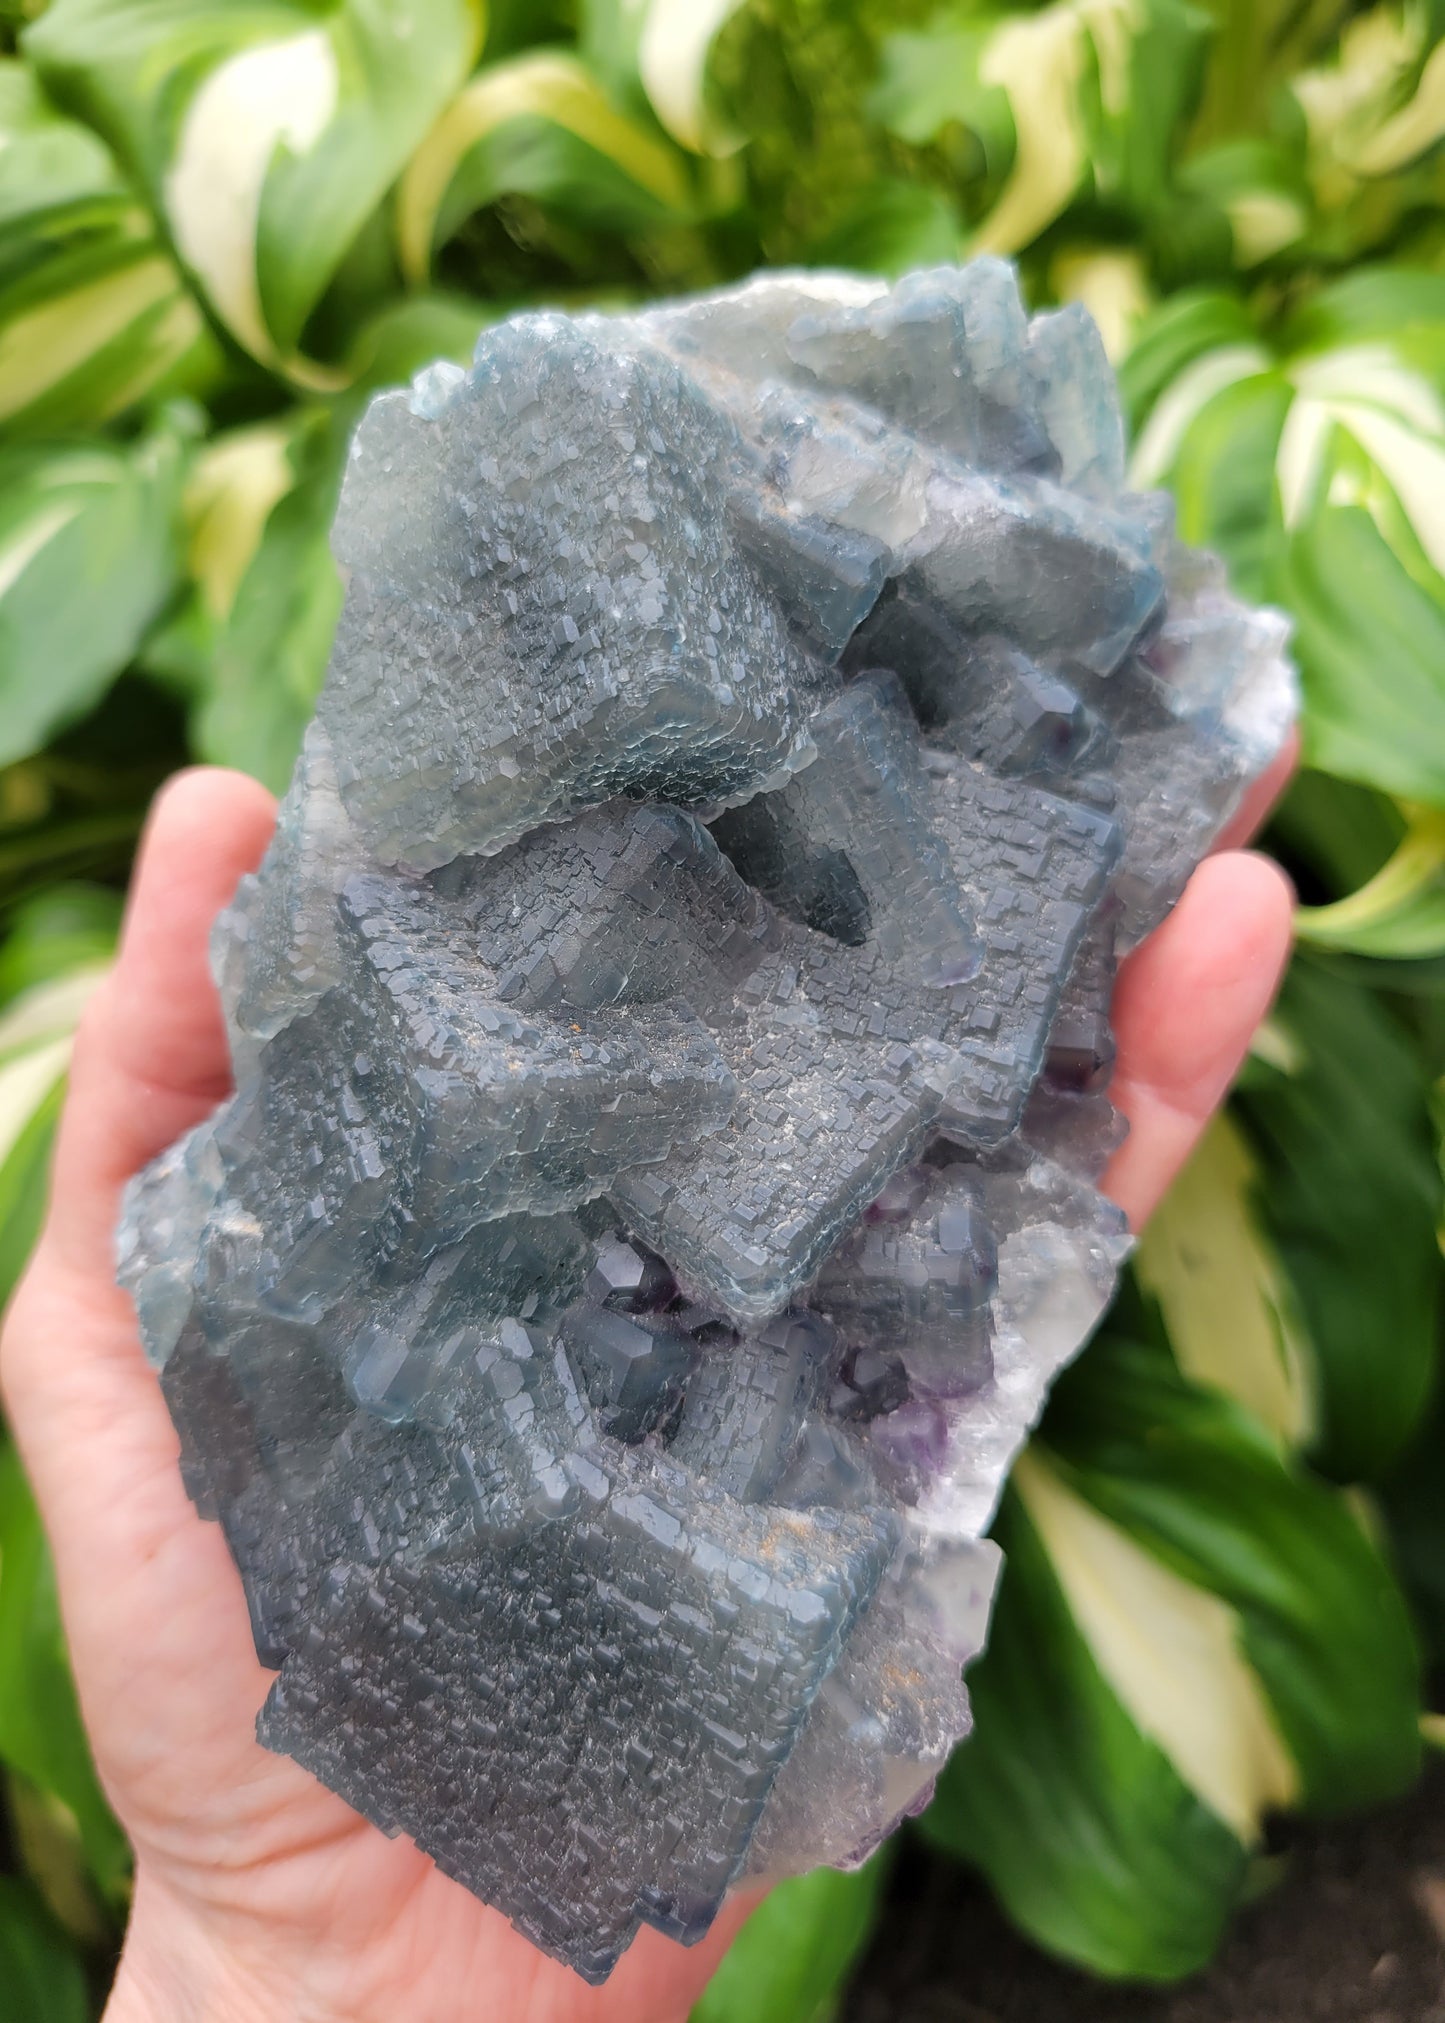 Fluorite Specimen from China (W 6 X D 3 1/4 X 2 inches)